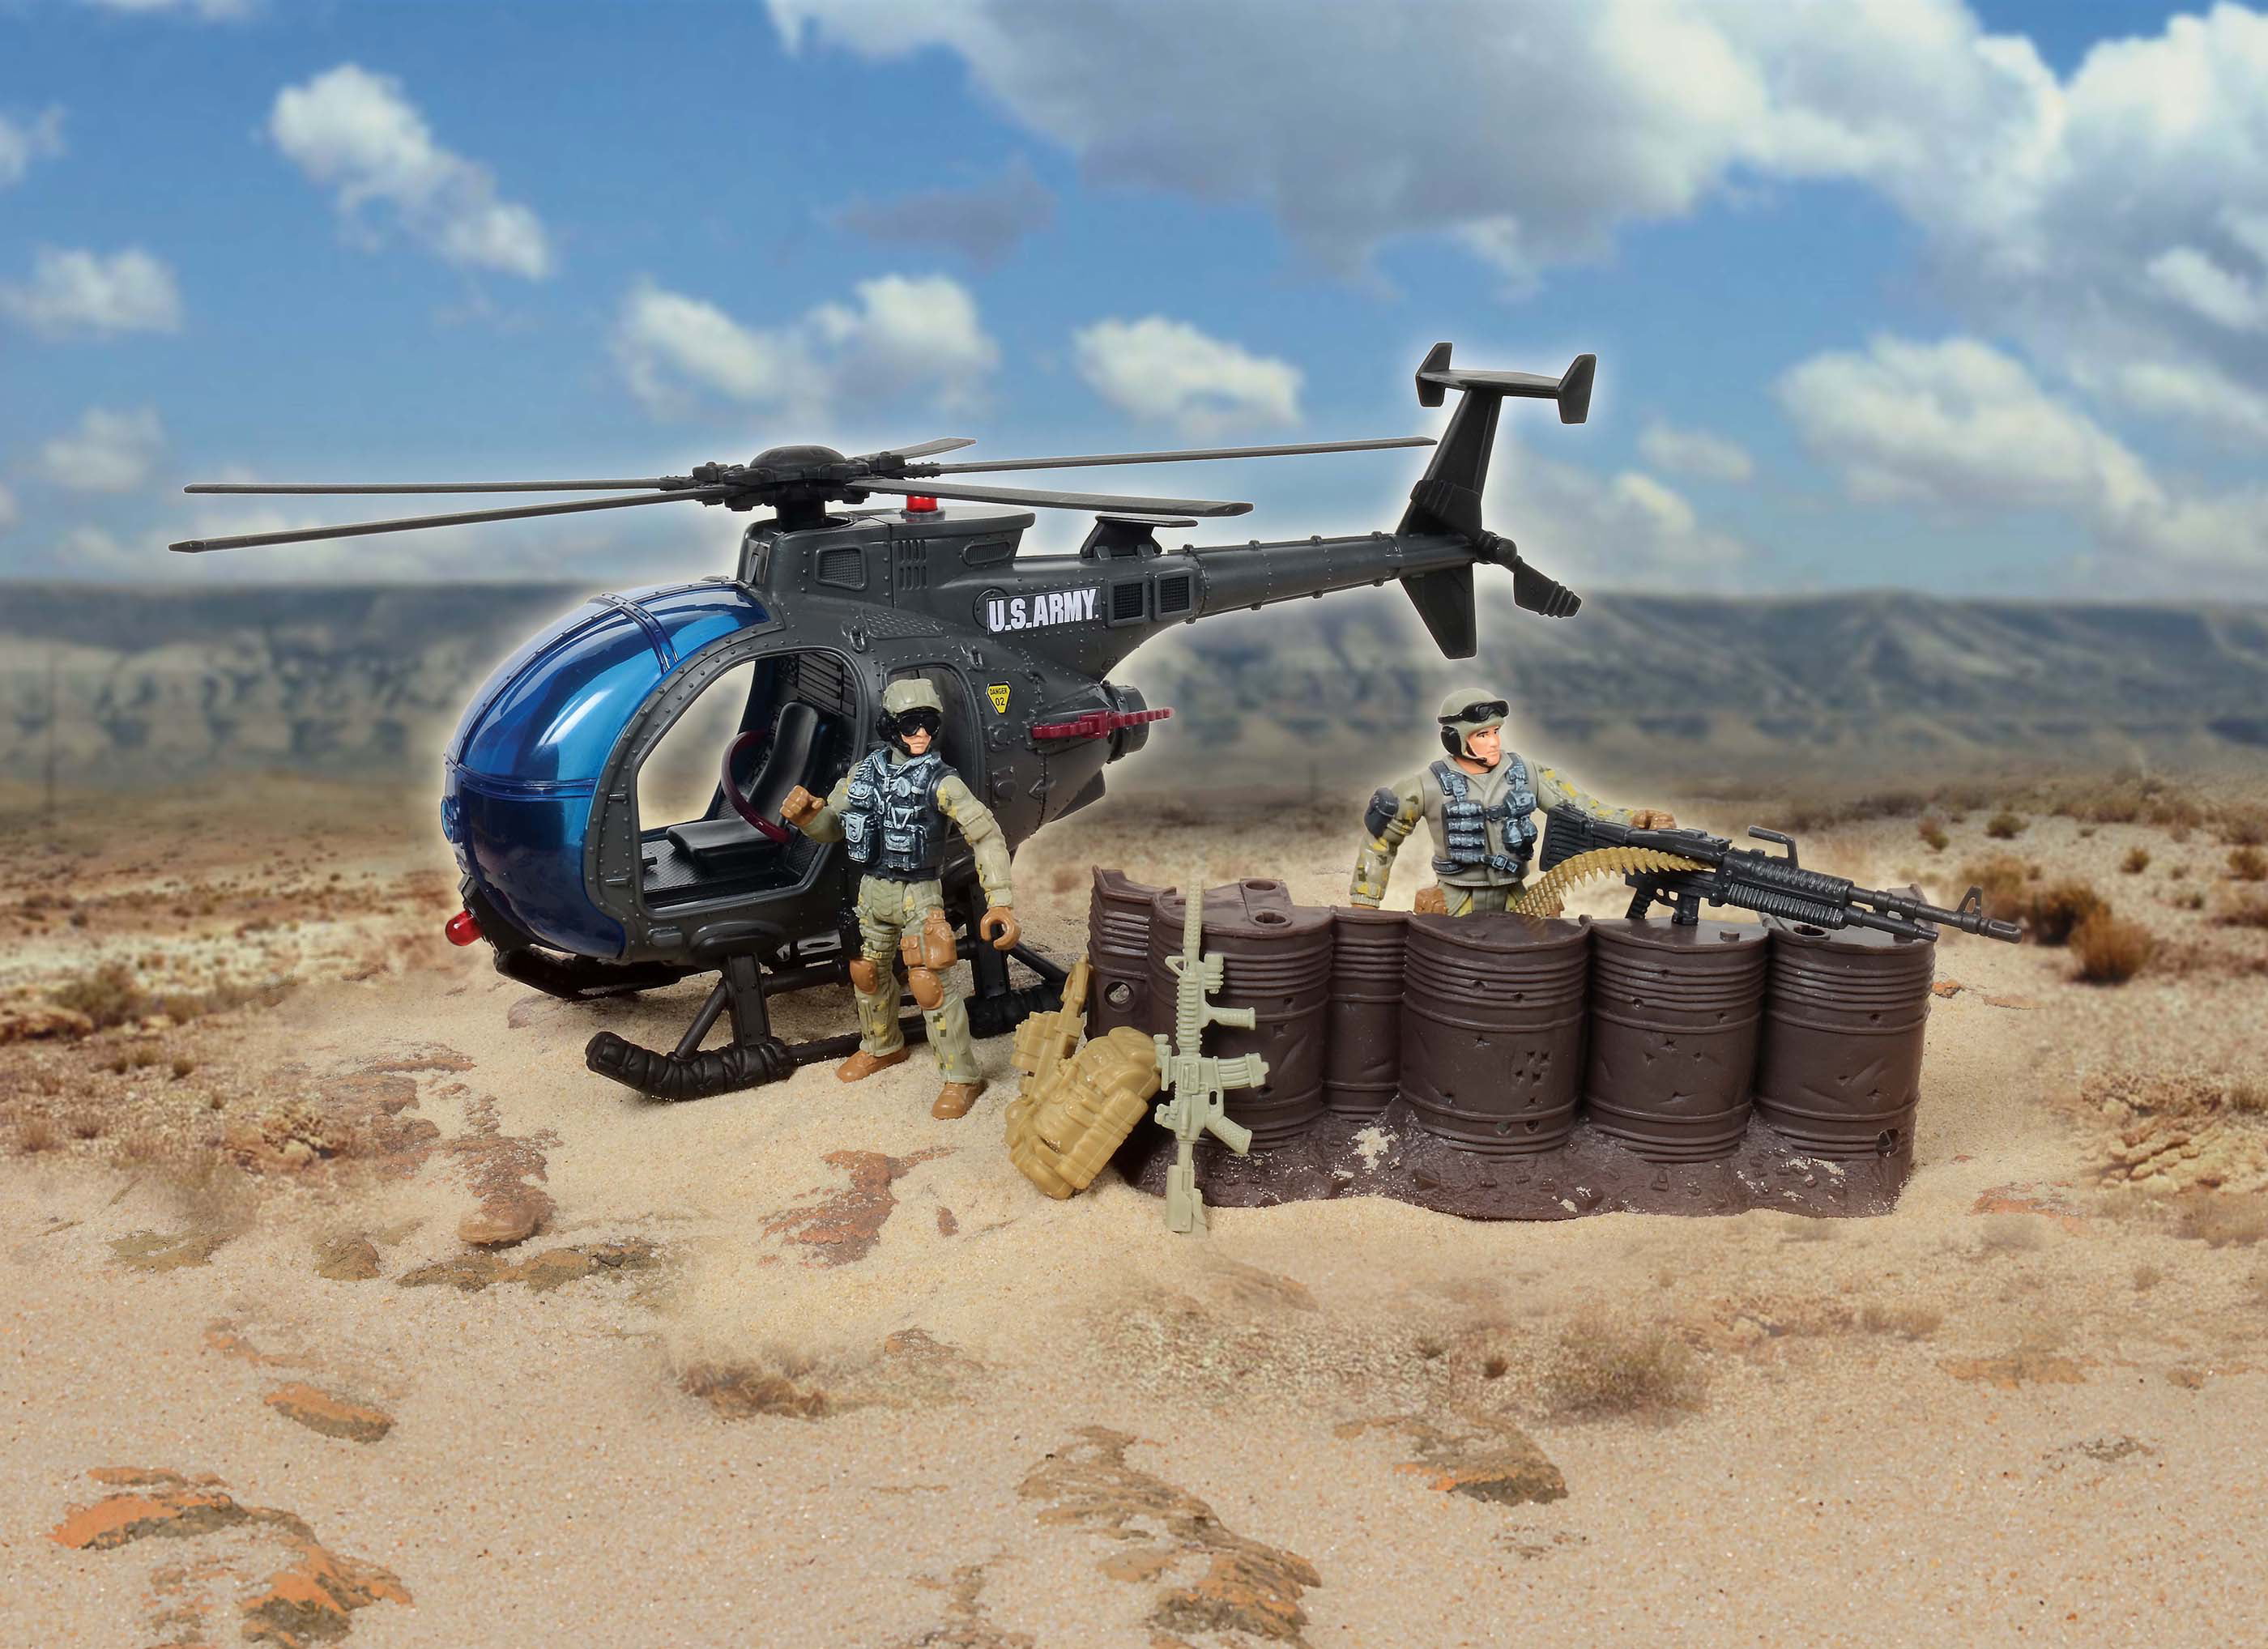 Excite U.s Army Assault 4 Wheeler Soldier Action Figure for sale online 